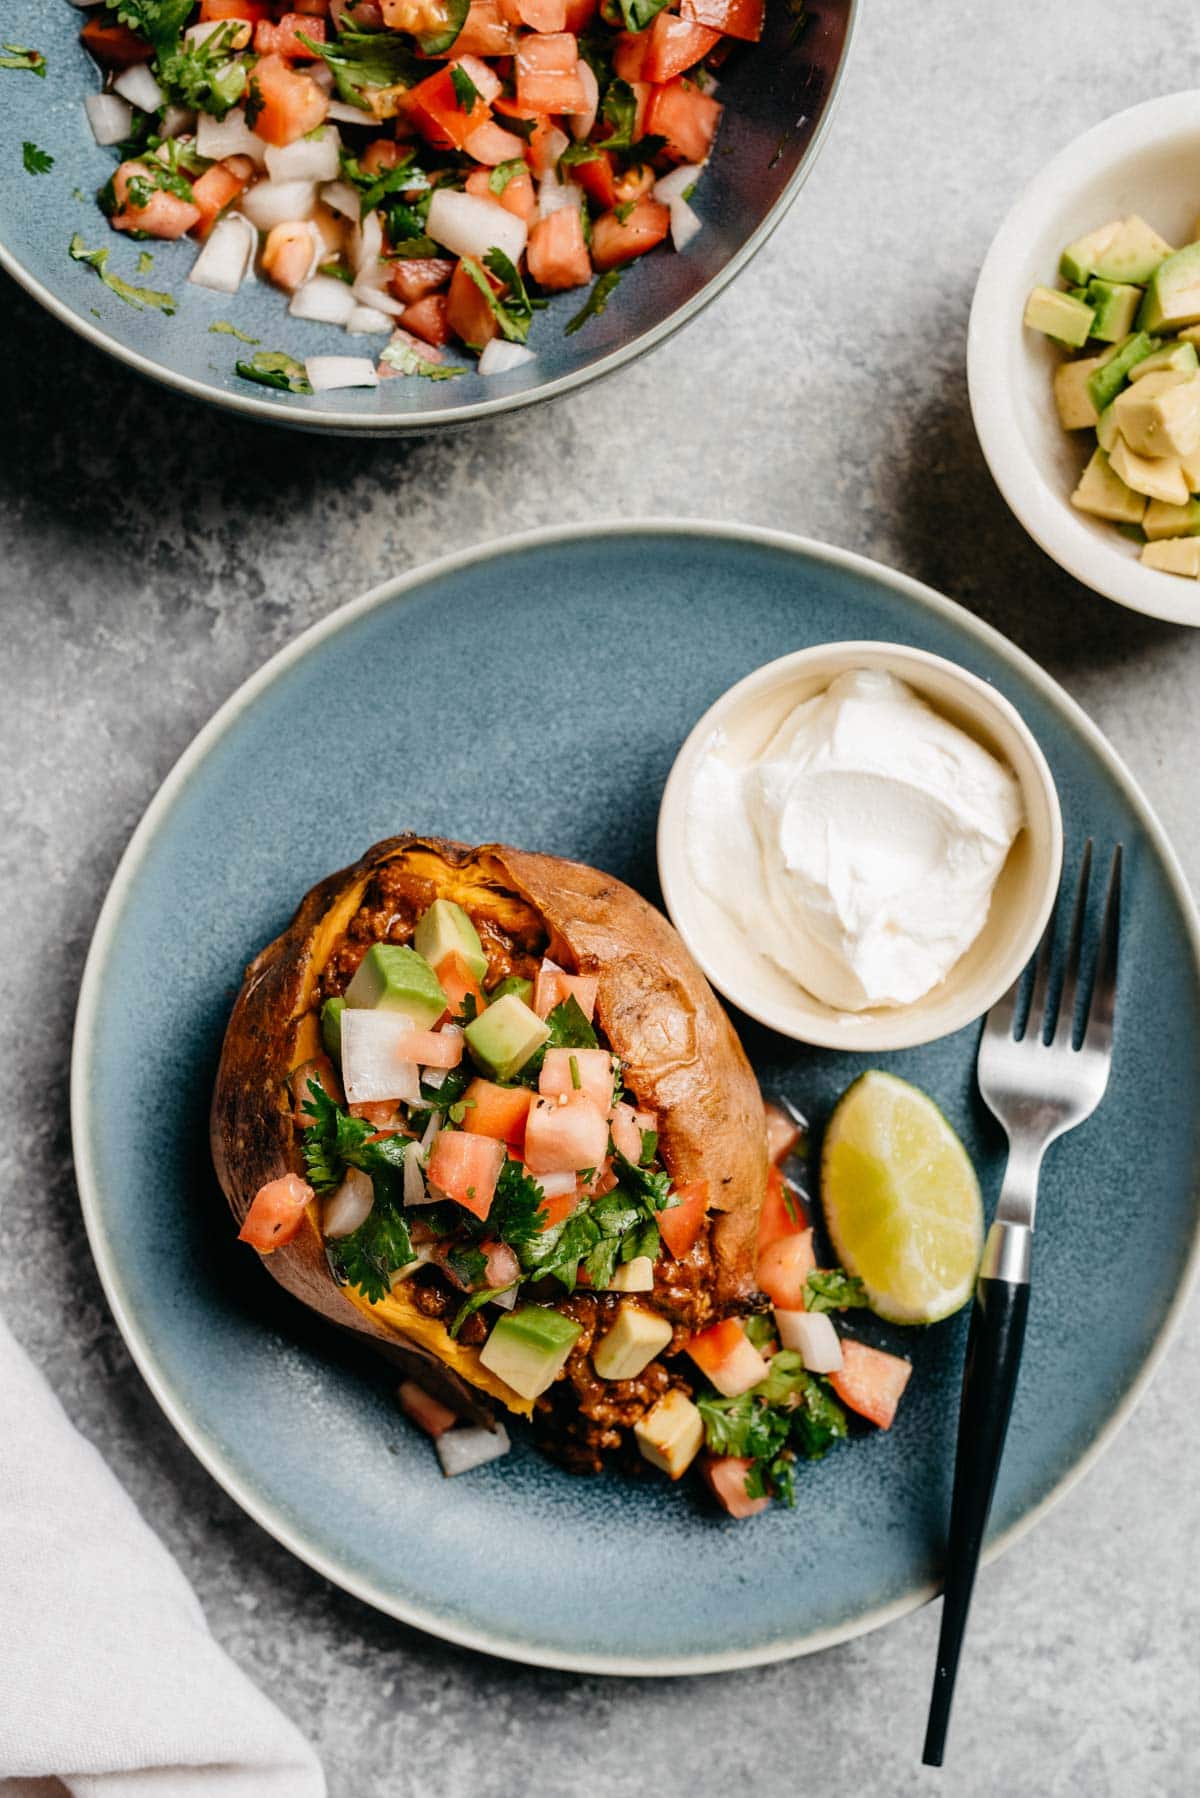 A baked potato stuffed with ground beef taco meat on a blue plate; small bowls of pico de gallo and avocado to the side, along with a linen napkin.